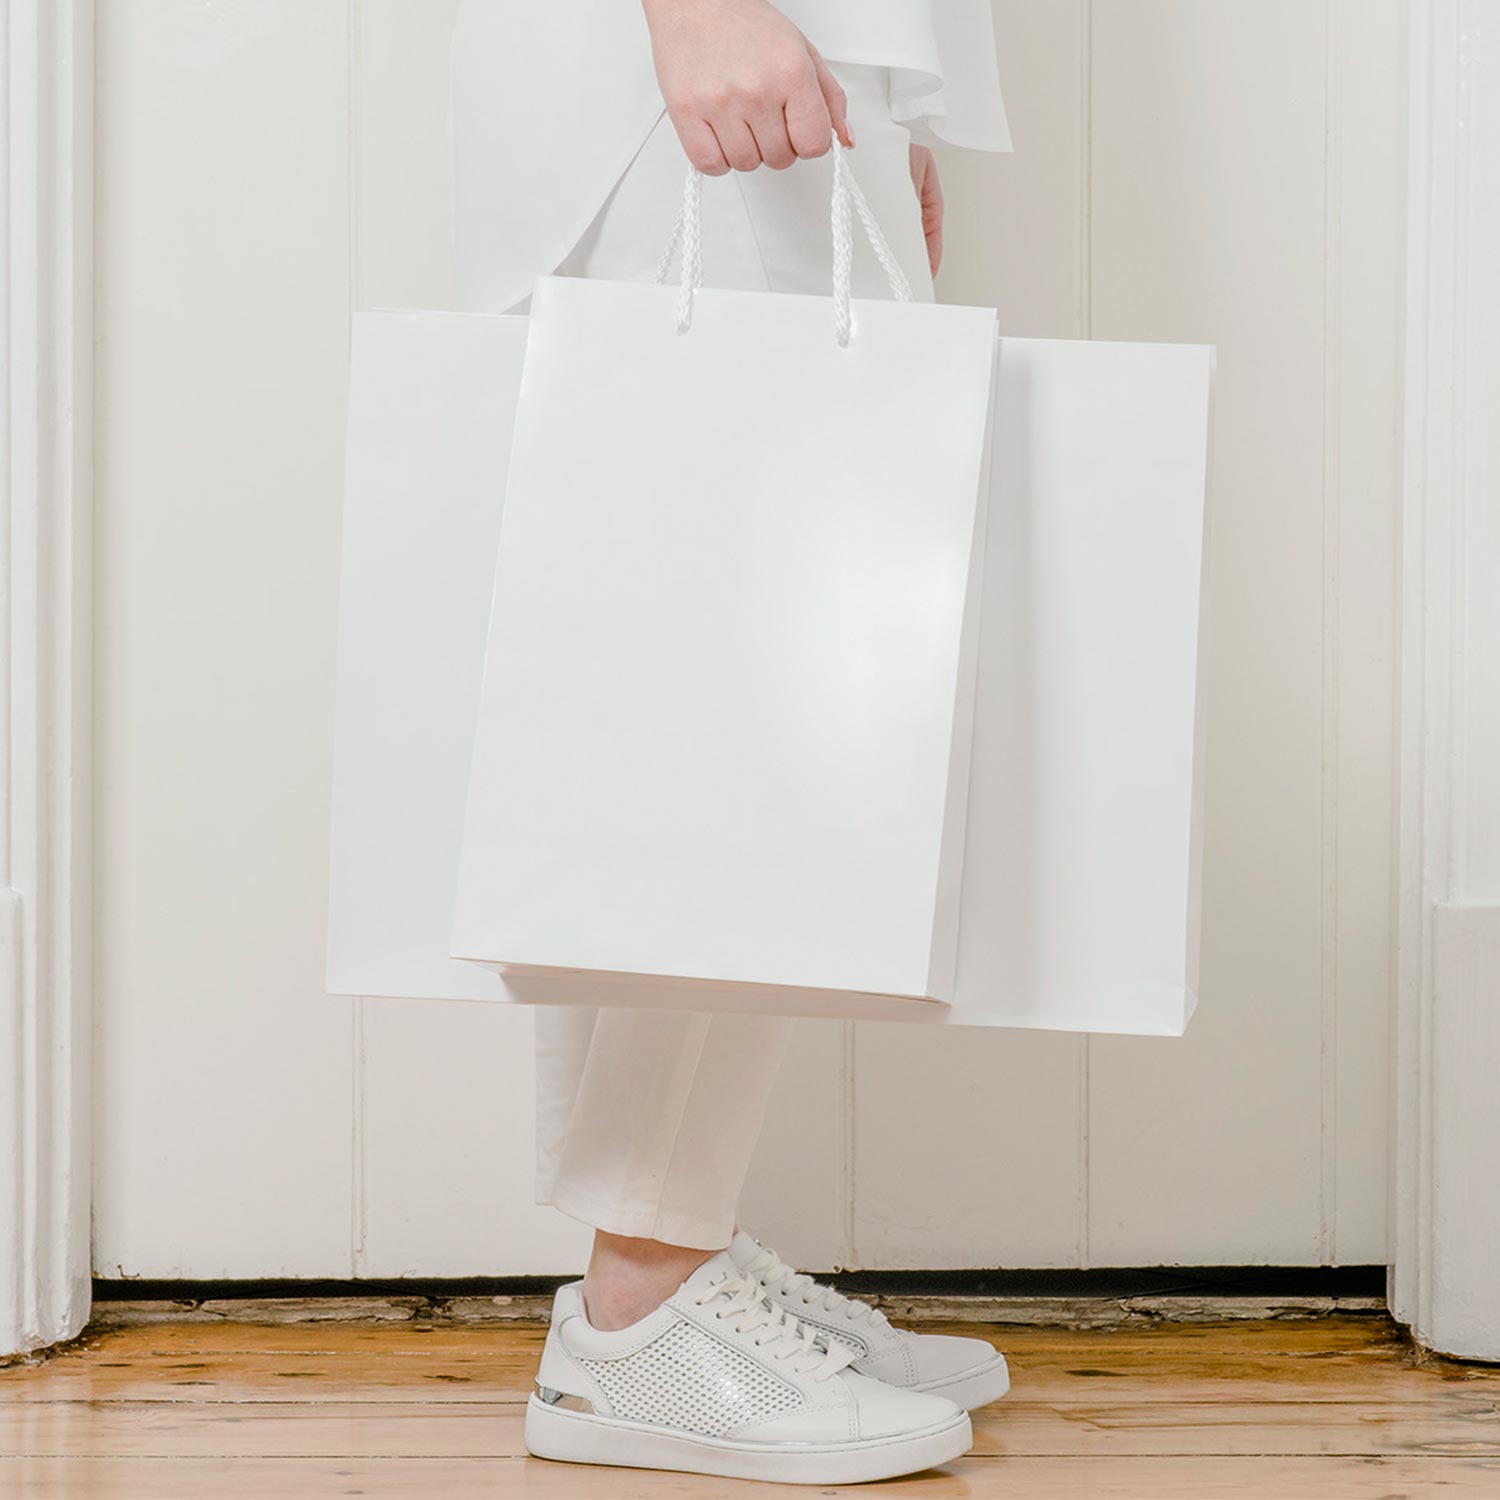 Image of person carrying paper carry bags